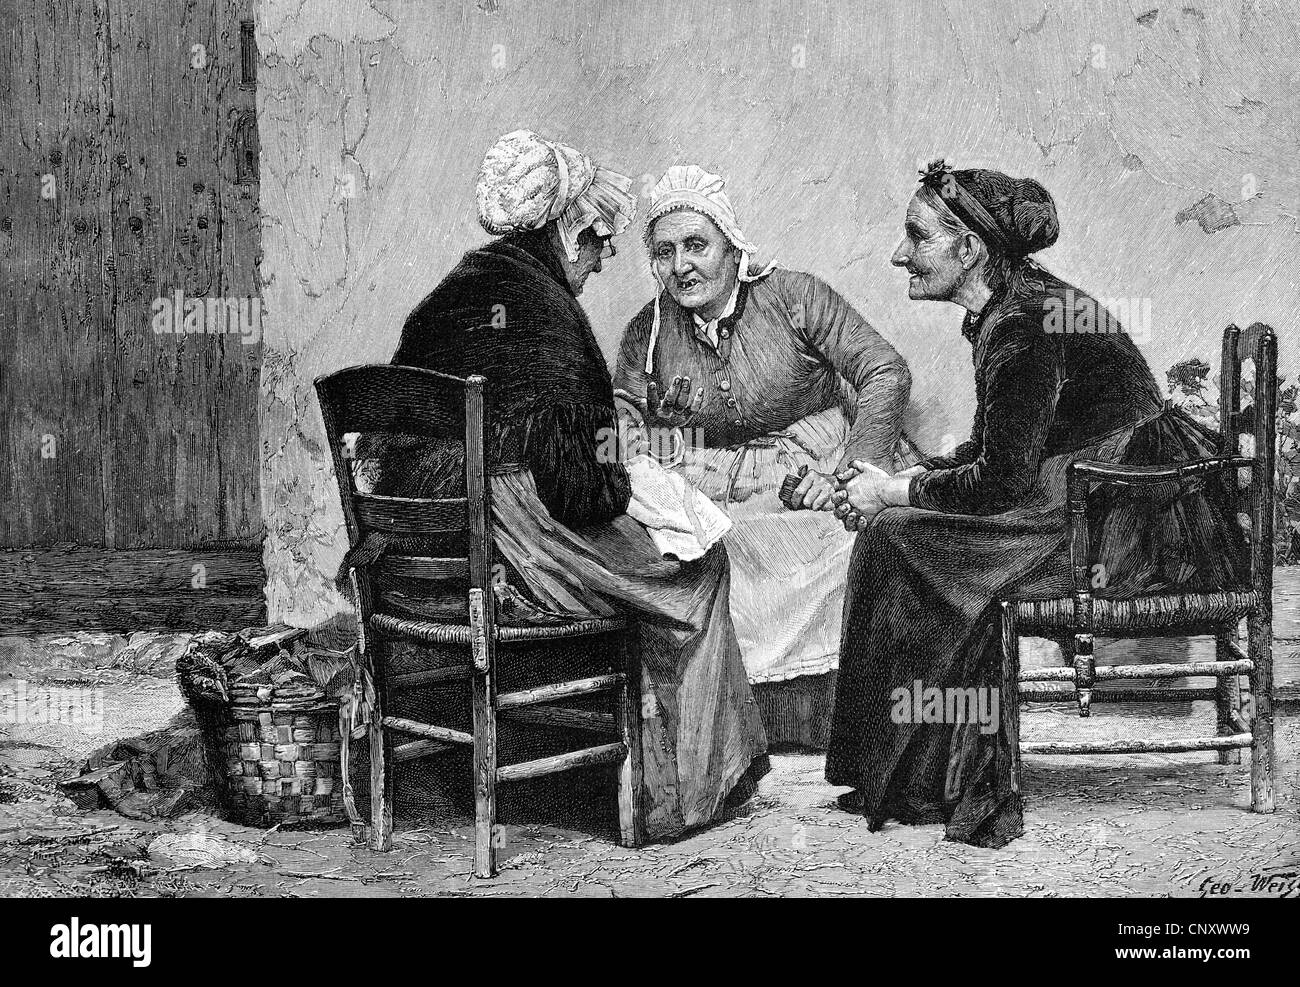 Gossipers, historic wood engraving, about 1897 Stock Photo